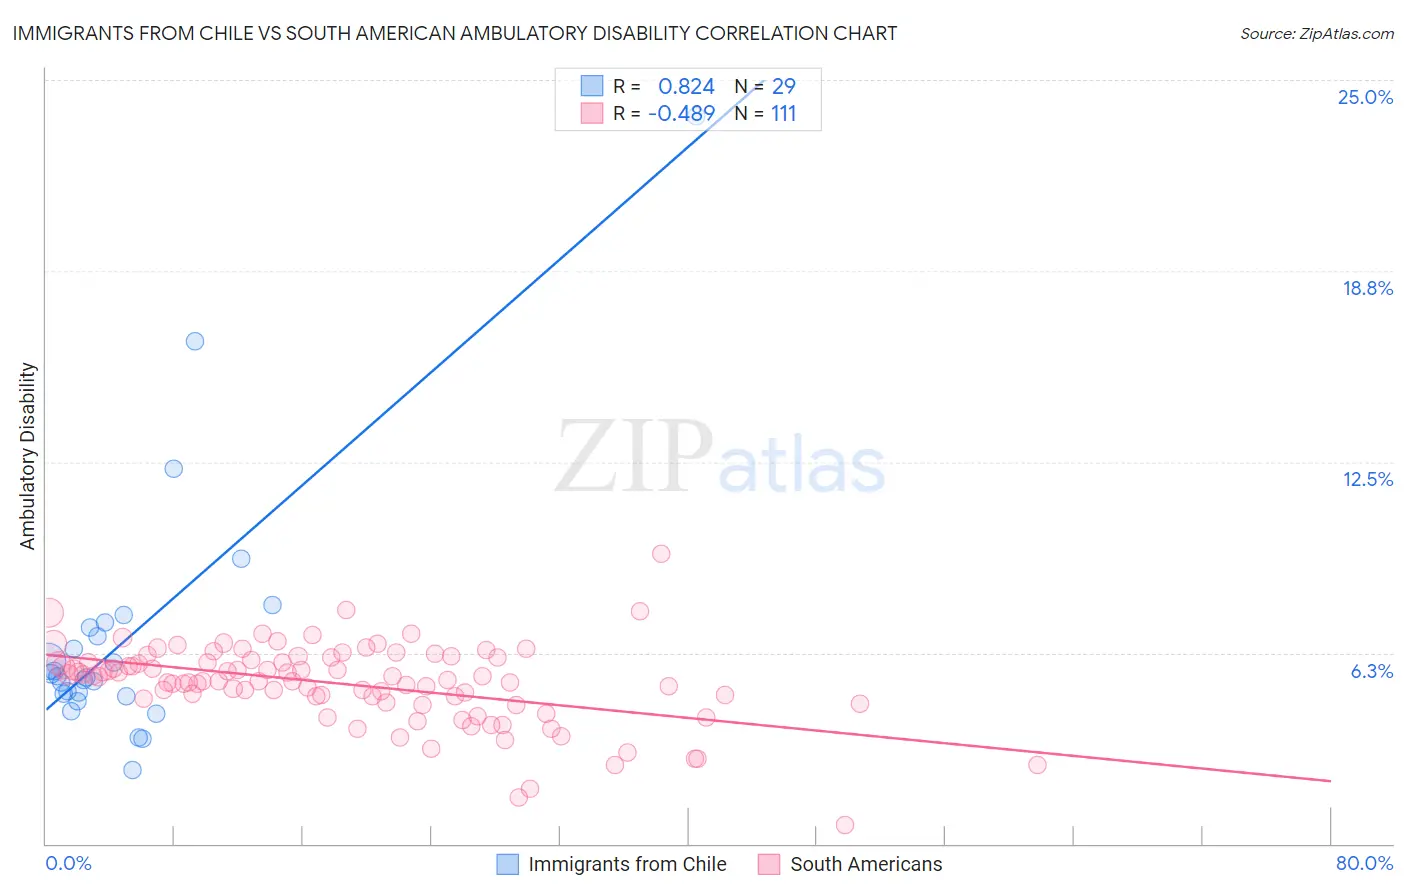 Immigrants from Chile vs South American Ambulatory Disability